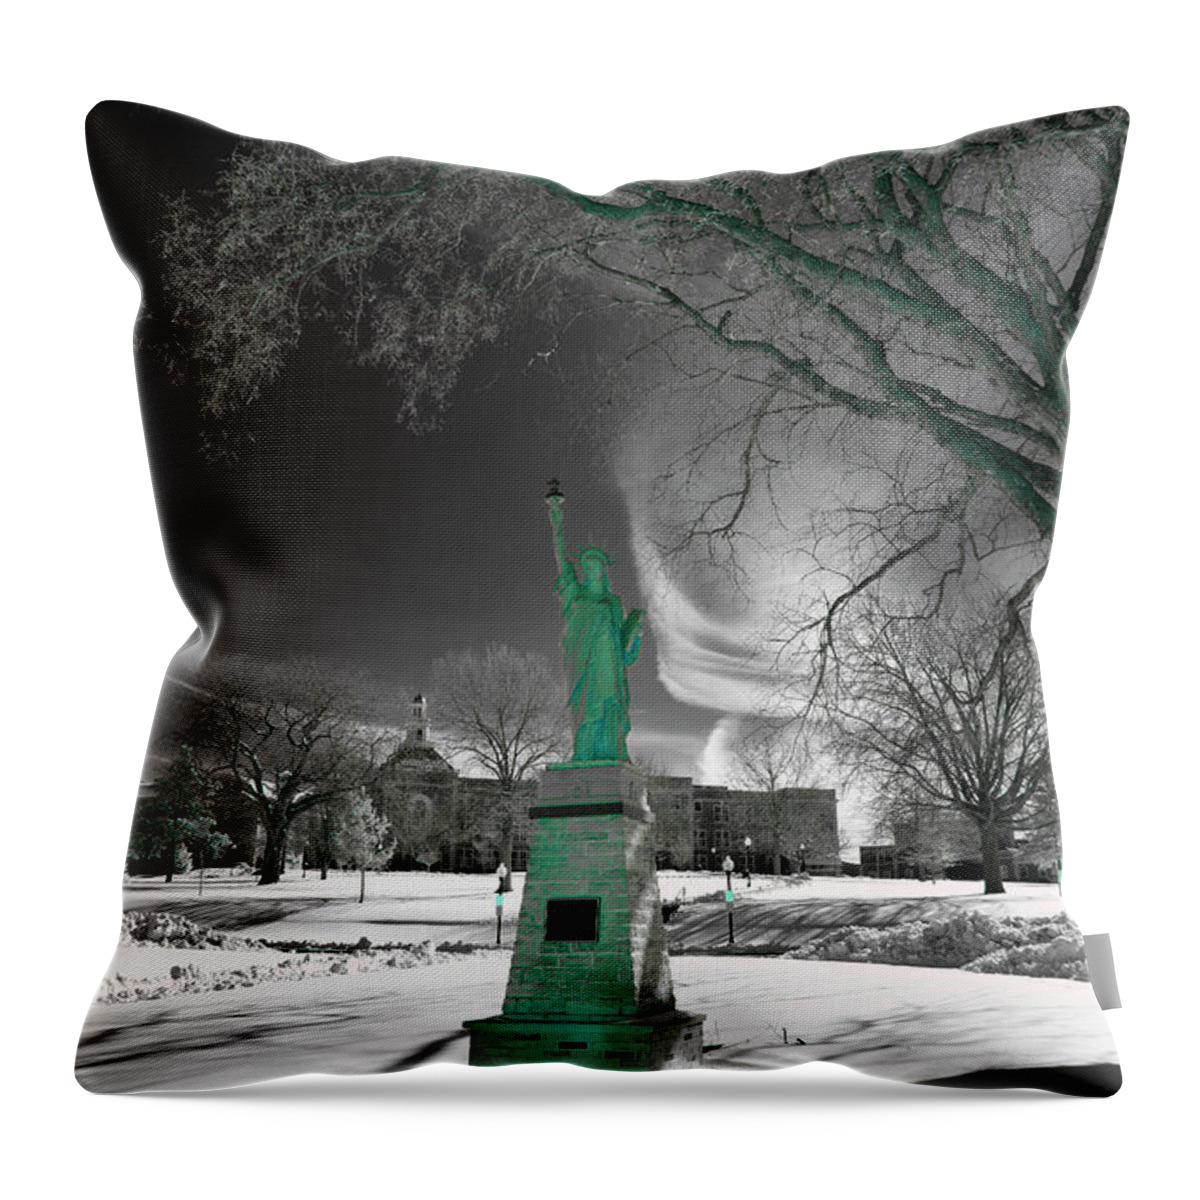 City High Throw Pillow featuring the photograph City High Statue by Jamieson Brown